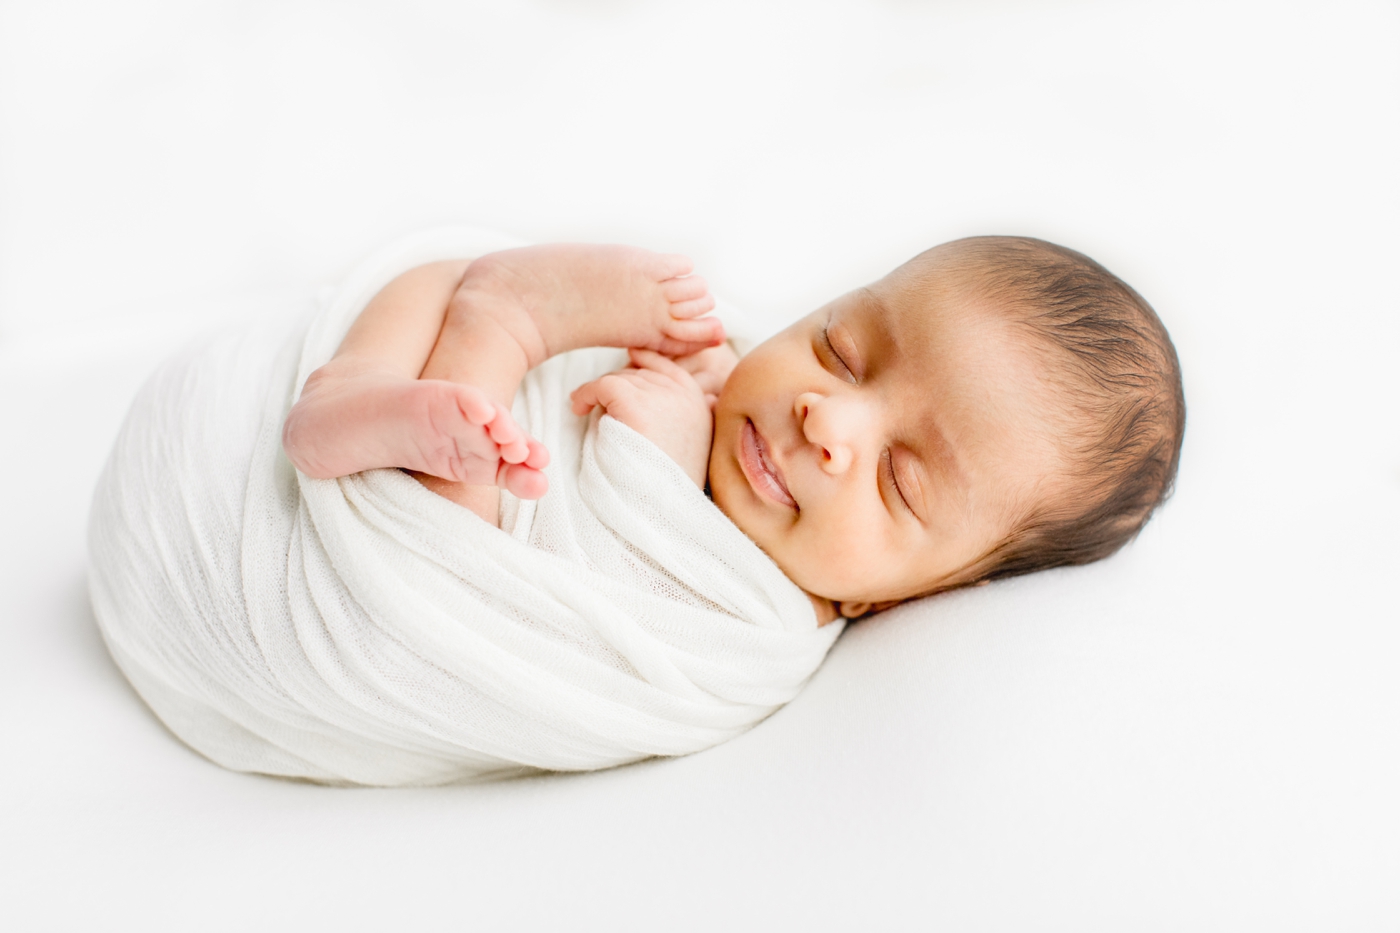 Newborn baby boy curled up in white swaddle on white backdrop during Austin TX newborn session. Photo by Sana Ahmed Photography.